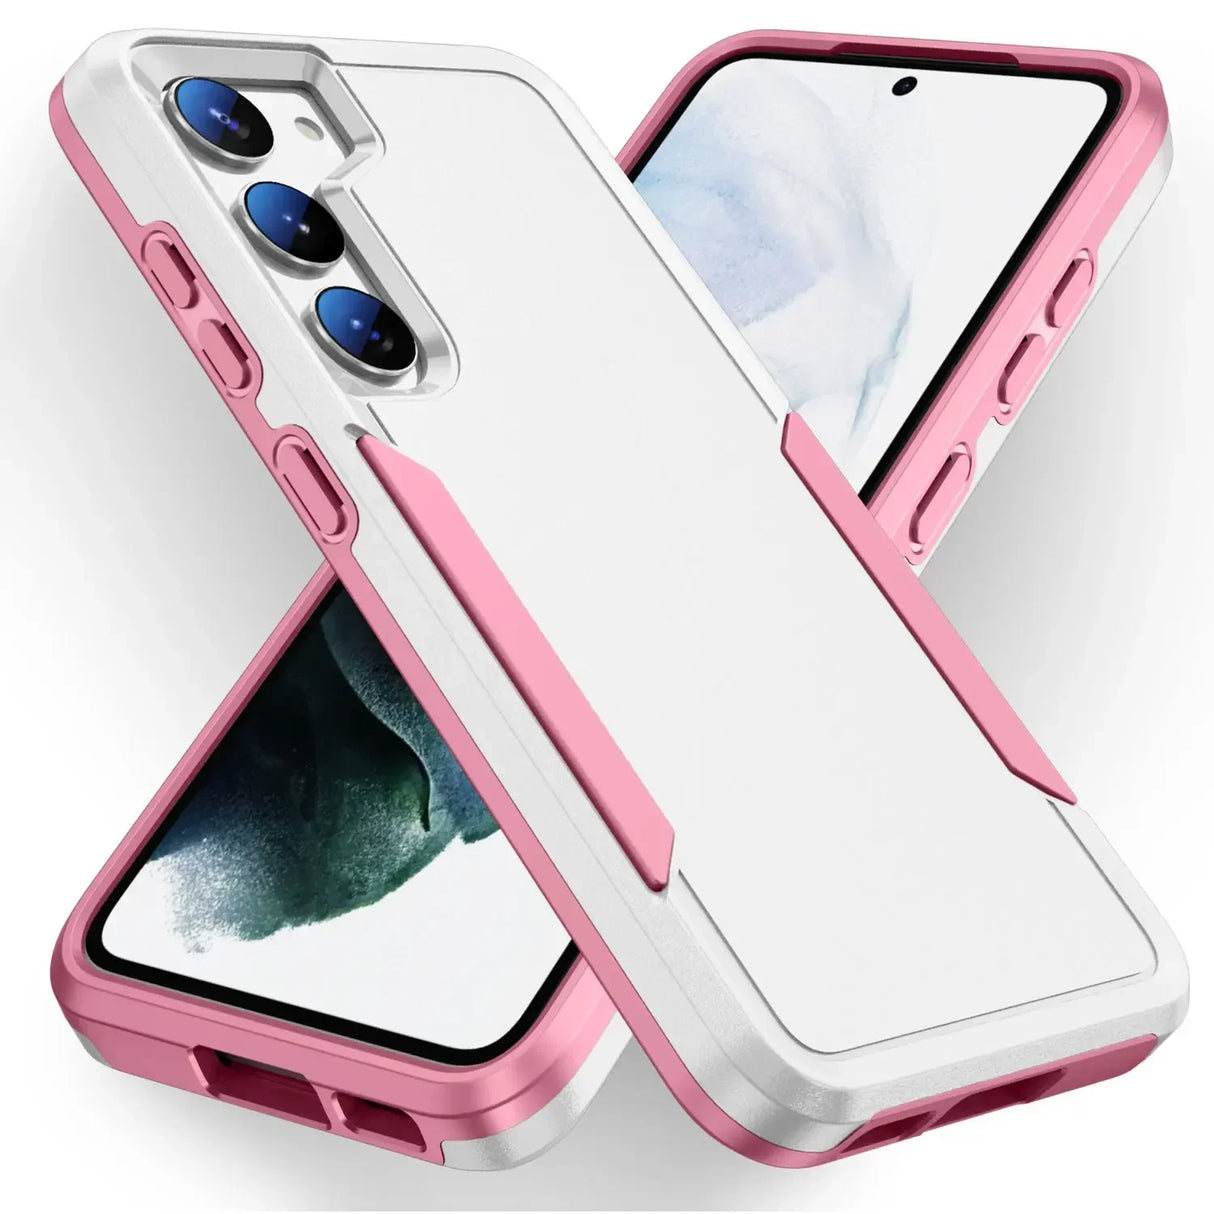 the iphone 11 case is shown in pink